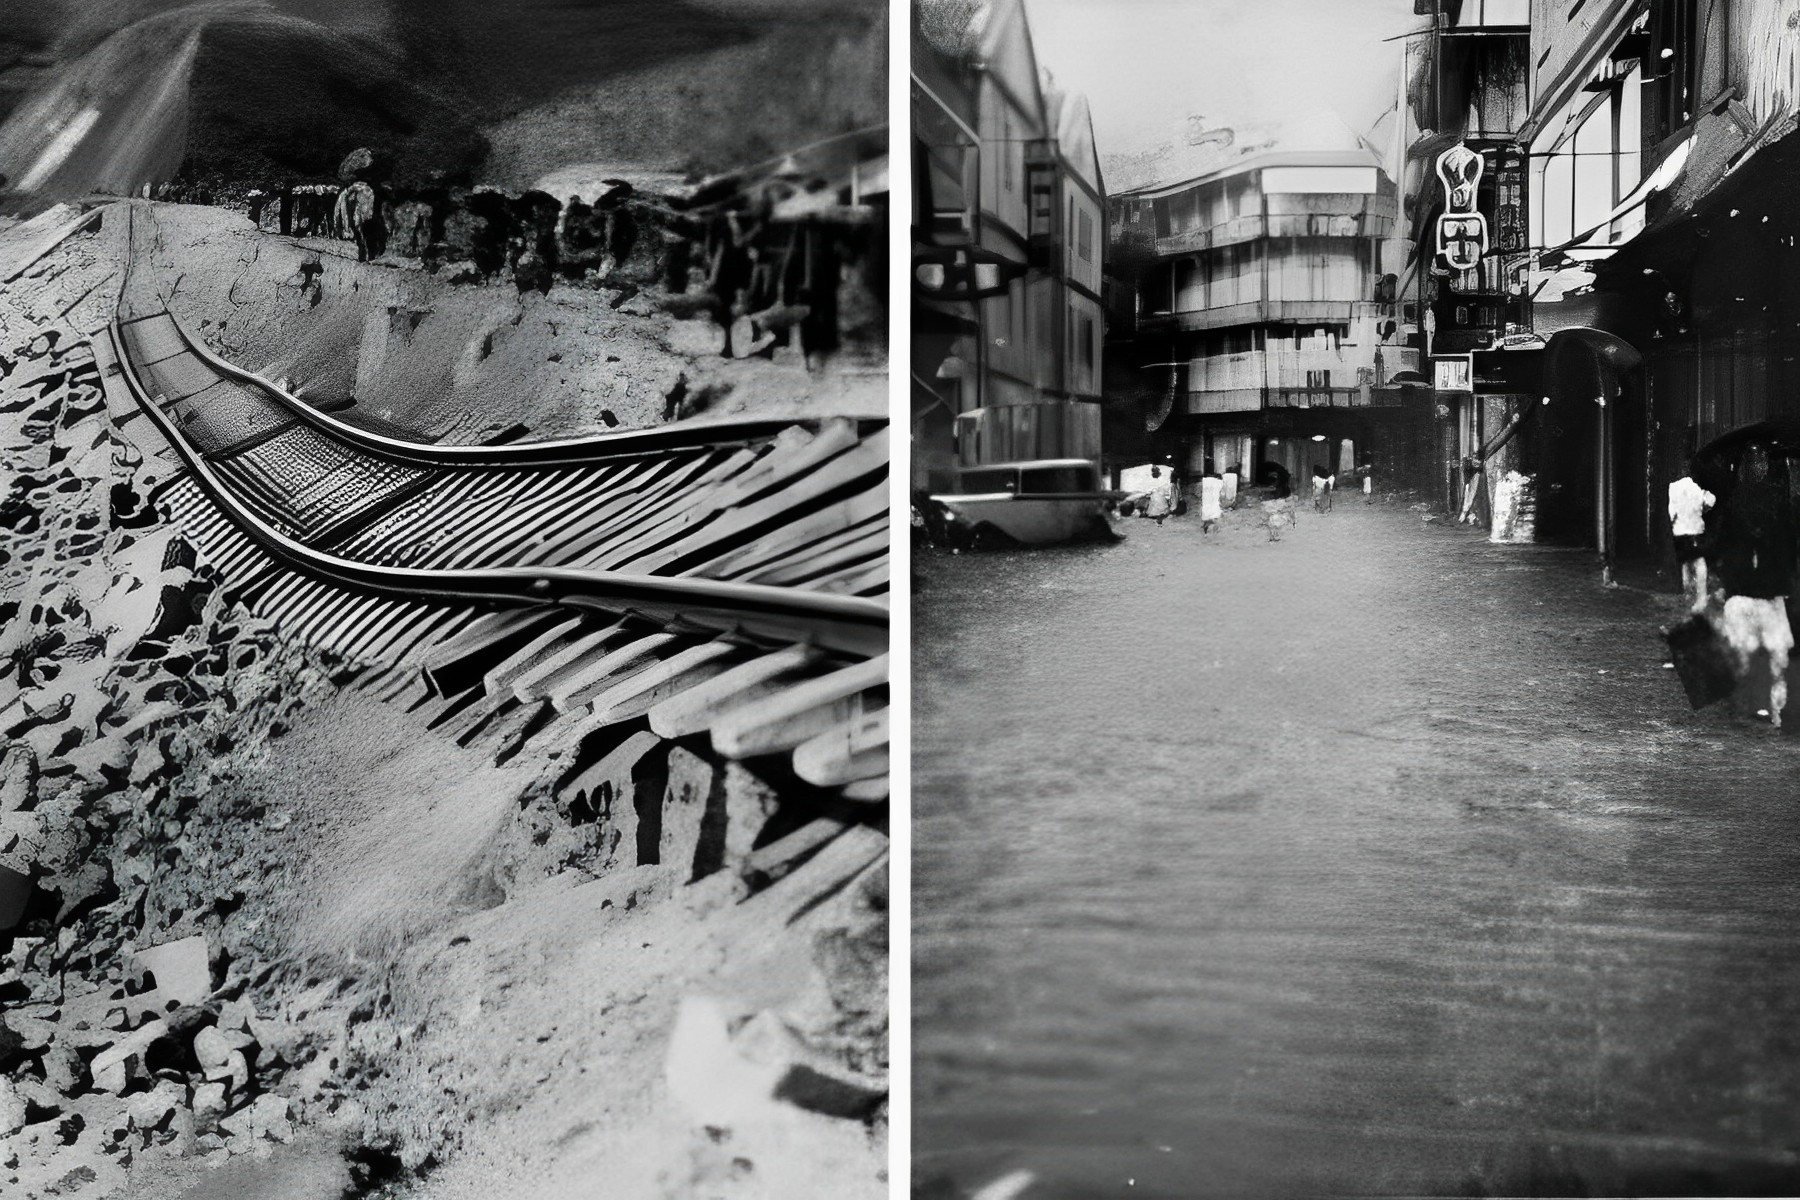 A collage of two black-and-white images showing the damage done to key areas of Hong Kong during the 1937 typhoon. The image on the left shows how the track of the Kowloon-Canton Railway went askew. The image on the right shows flooding on Hillier Sreet in. Sheung Wan.